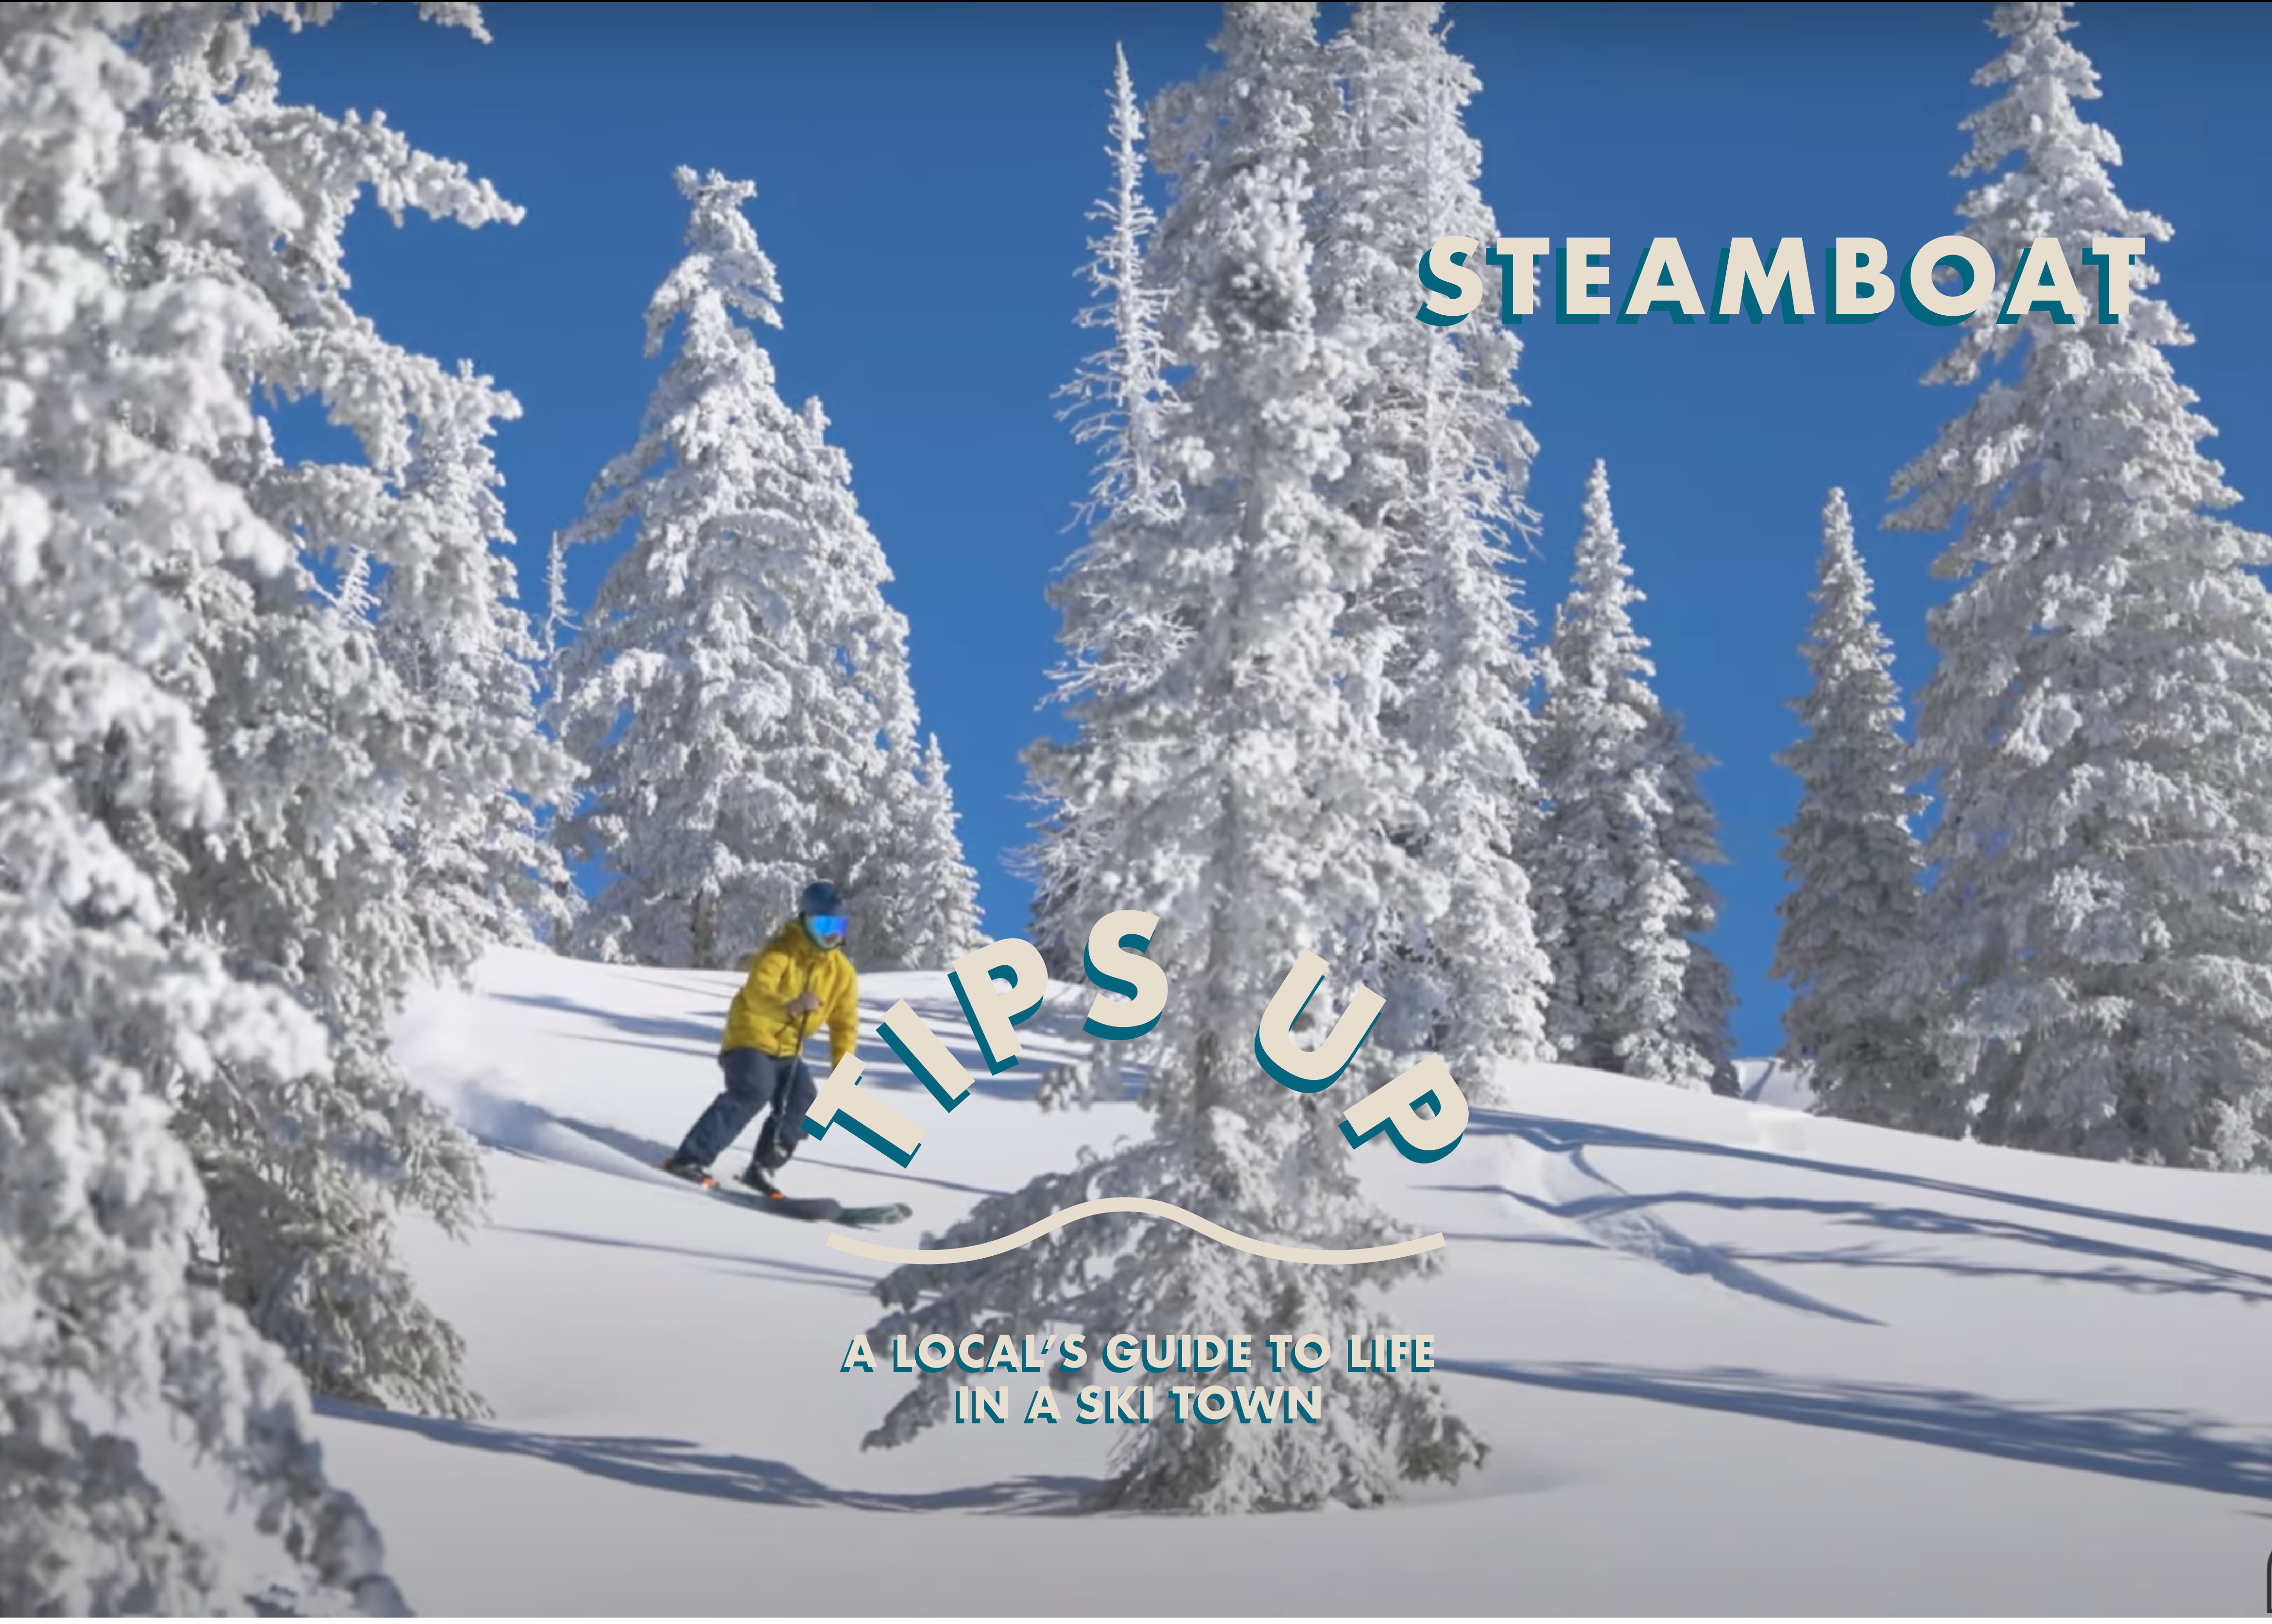 TIPS UP: GLADE HEADS TO STEAMBOAT